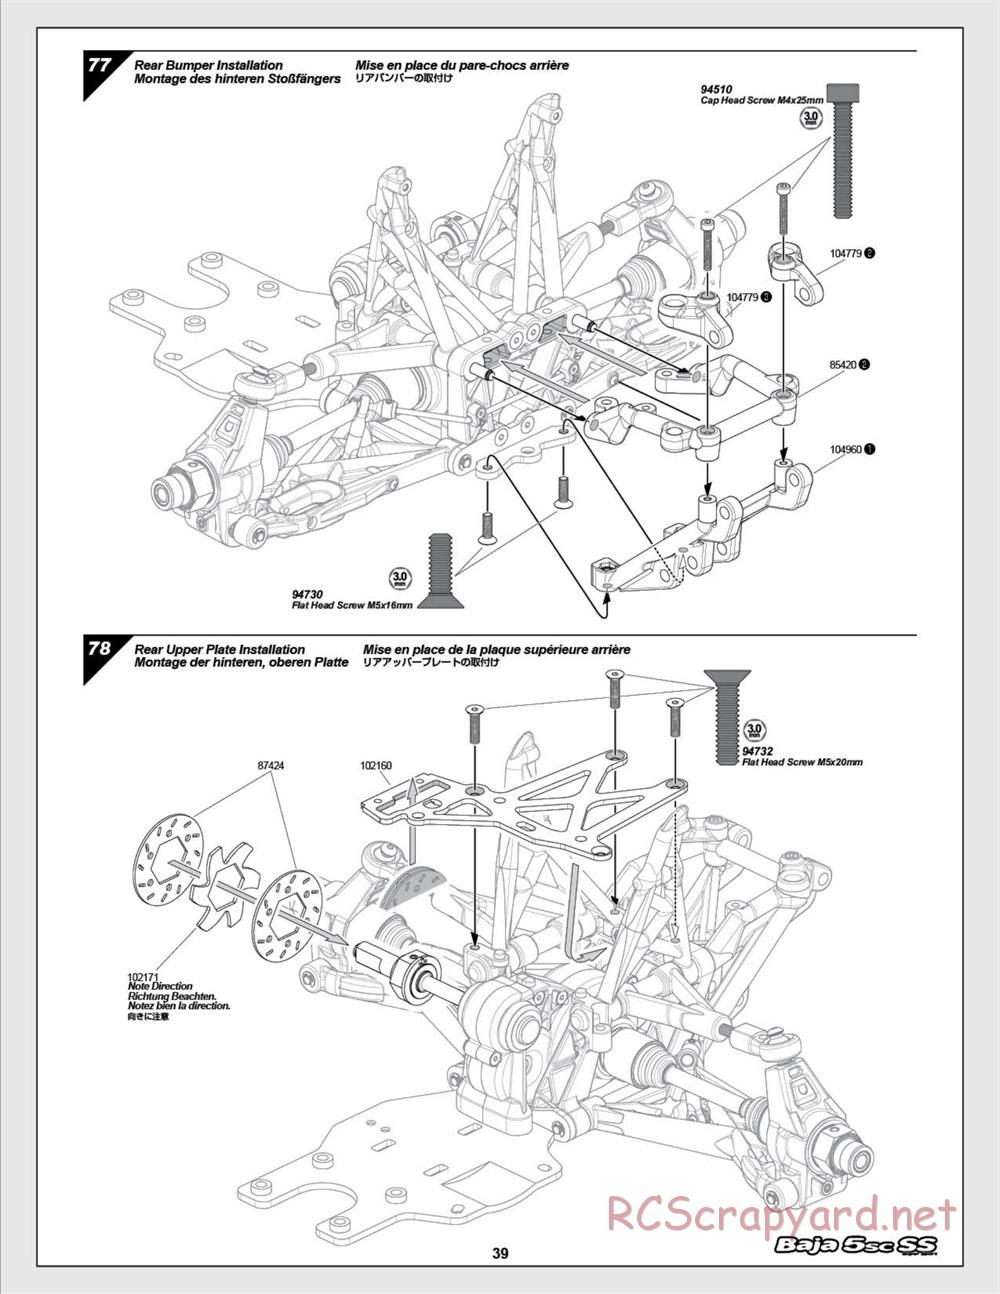 HPI - Baja 5SC SS - Exploded View - Page 39